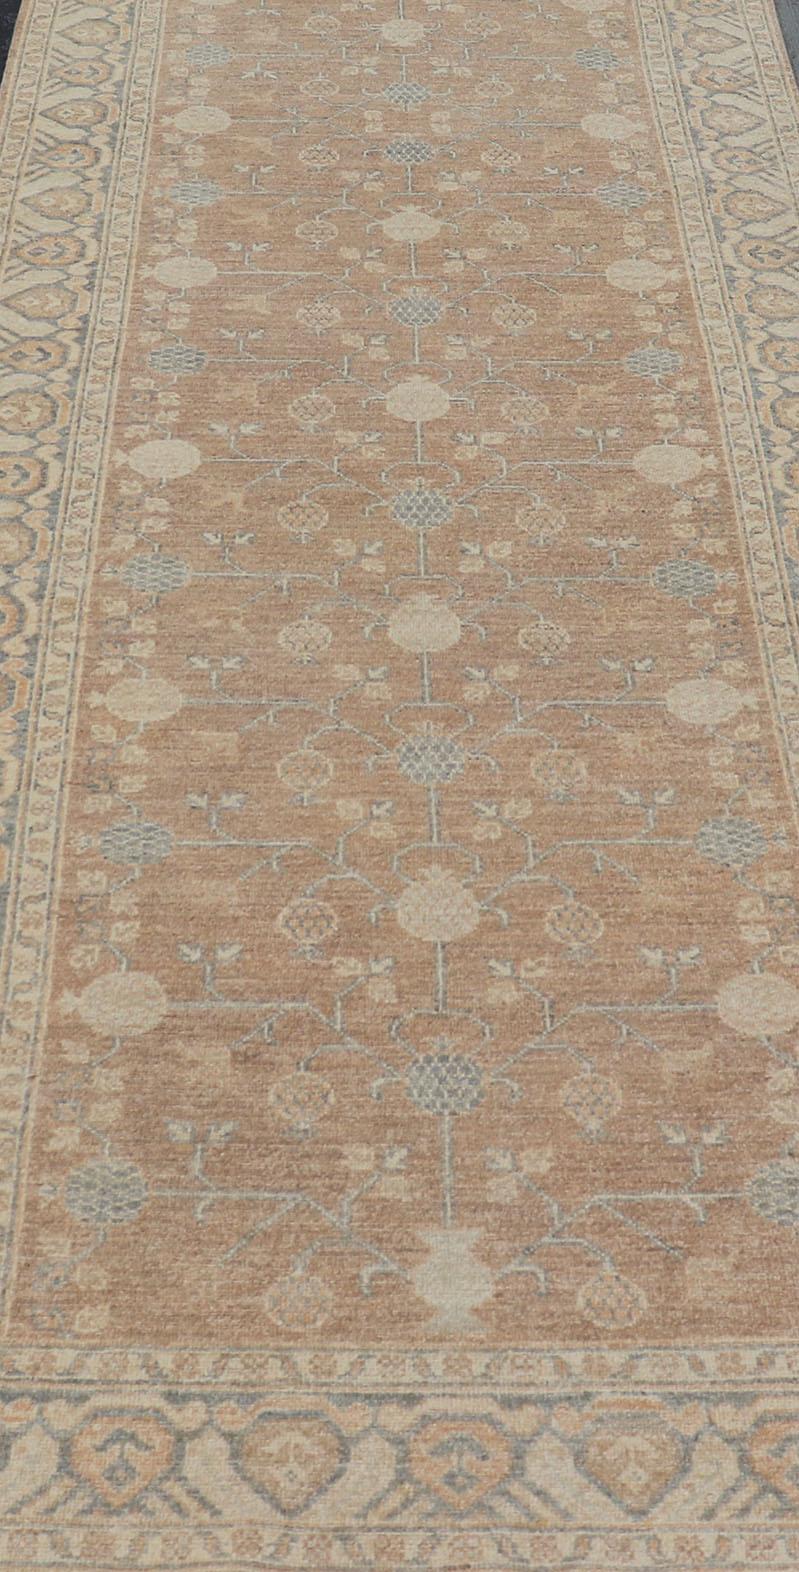 Pink Color Gallery Khotan Runner with Pomegranate Design in Light Tones In Excellent Condition For Sale In Atlanta, GA